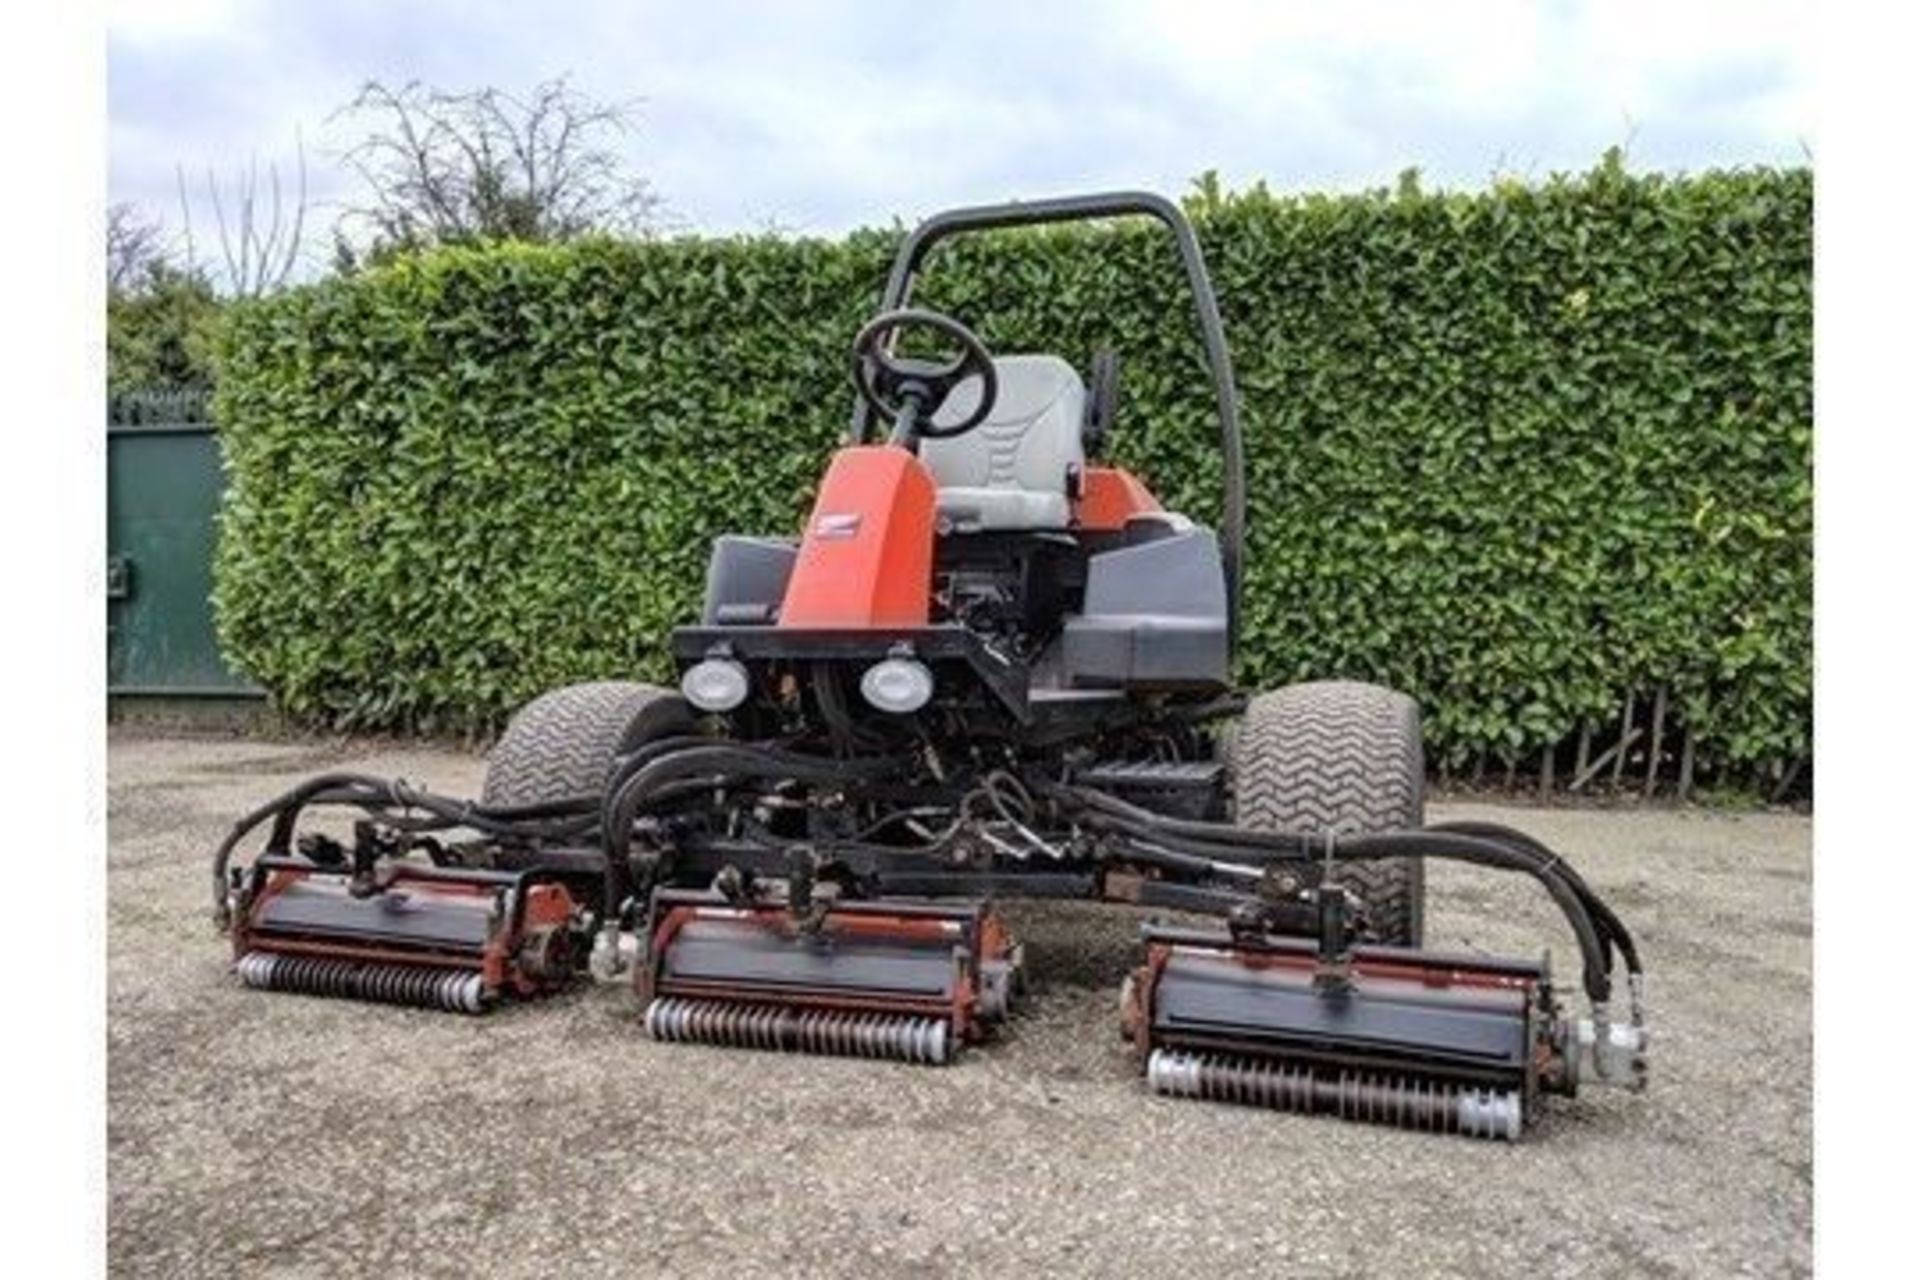 2007 Ransomes Jacobsen LF3800 4WD Cylinder Mower - Image 6 of 8